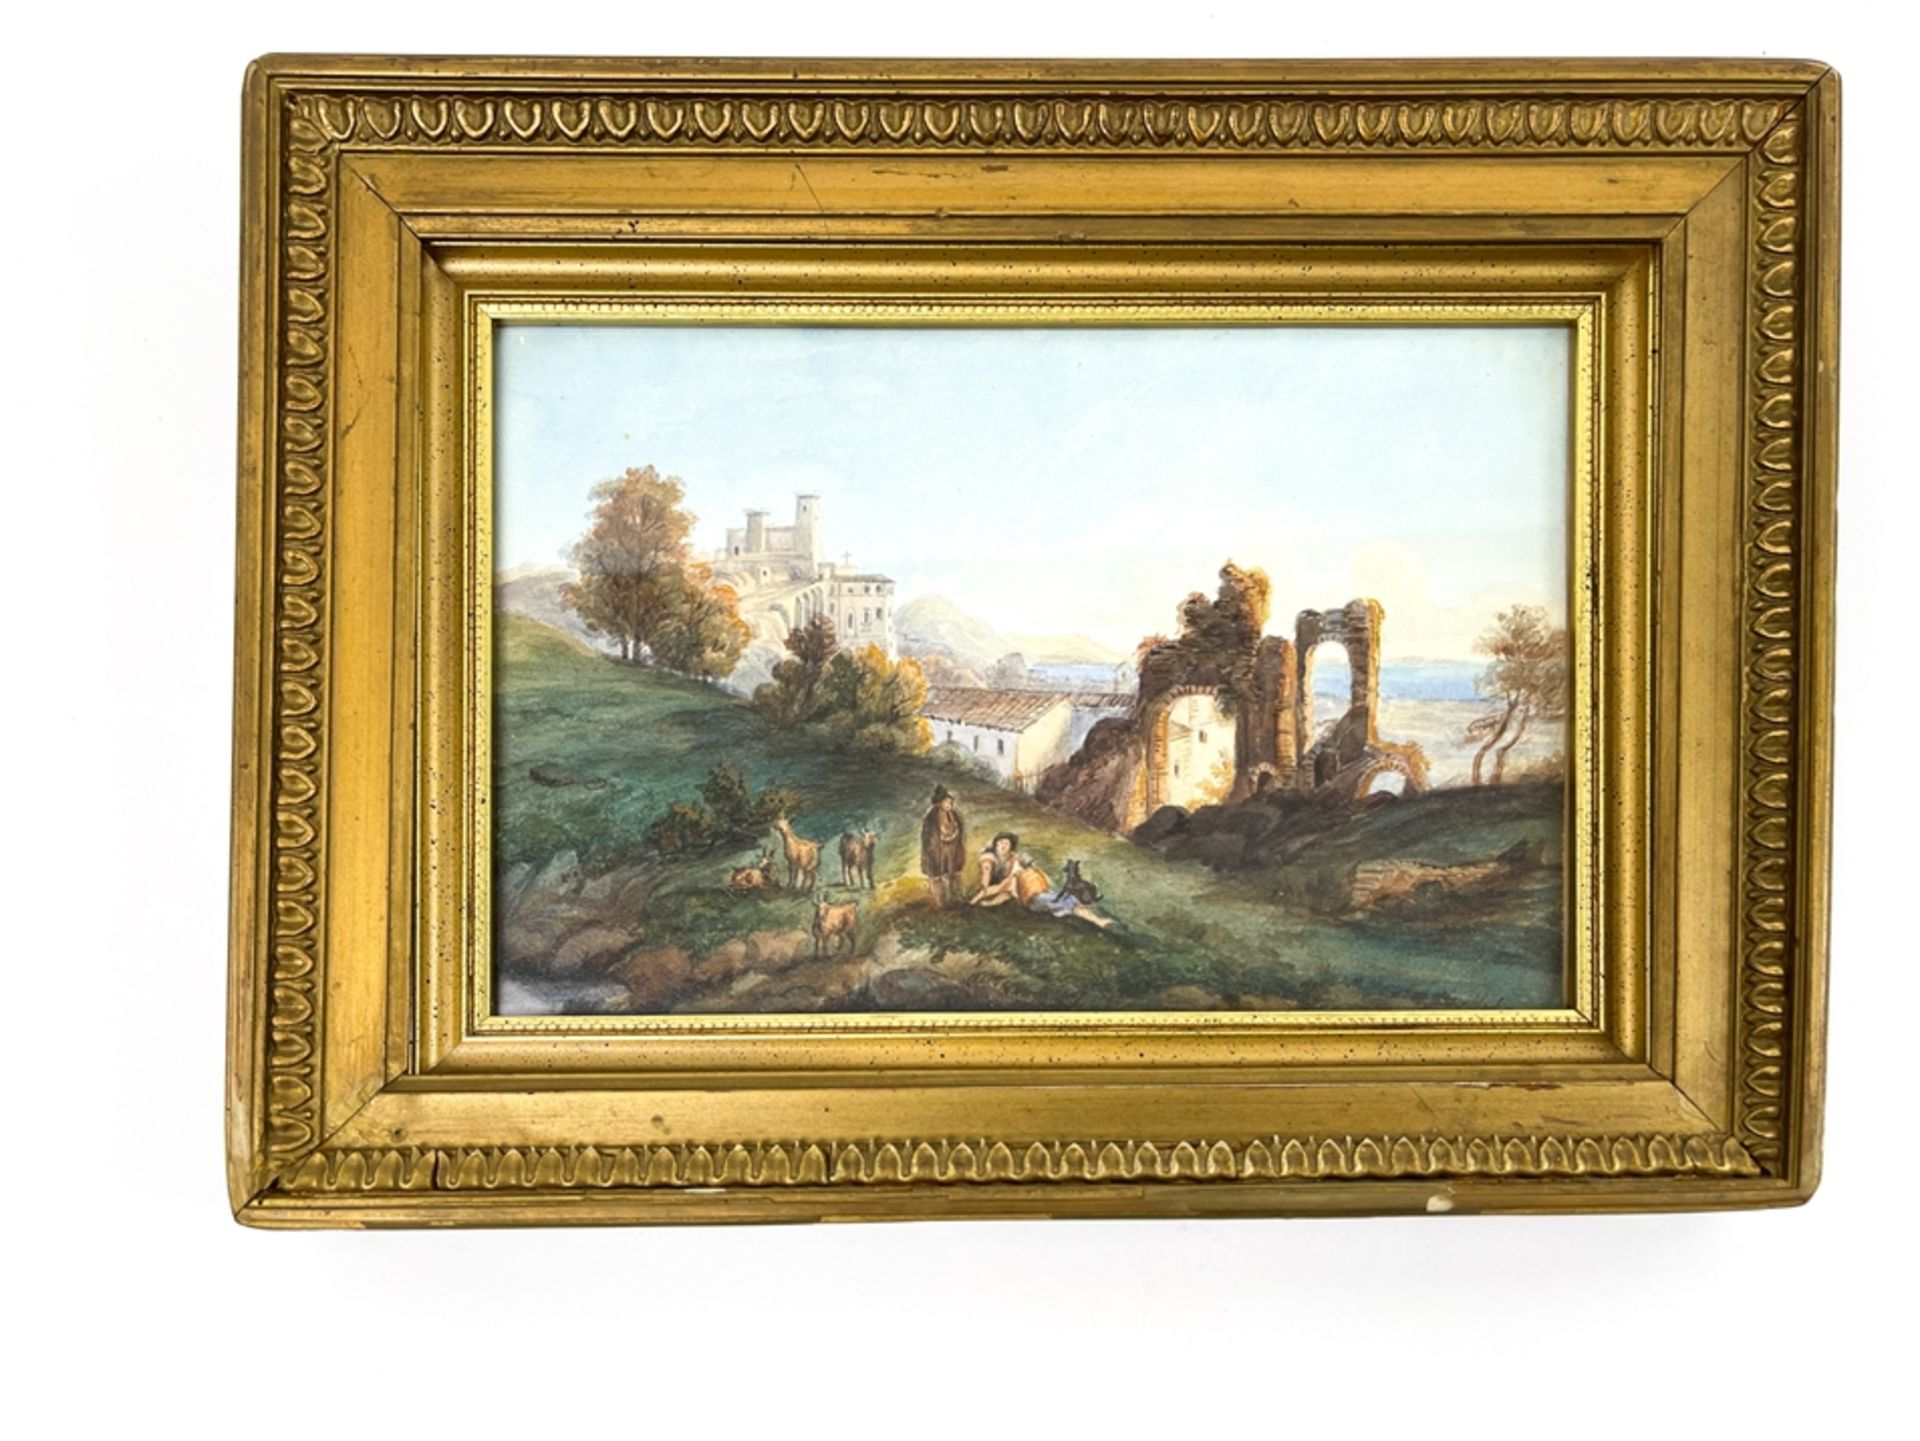 Painting ruins/castle in beautiful landscape